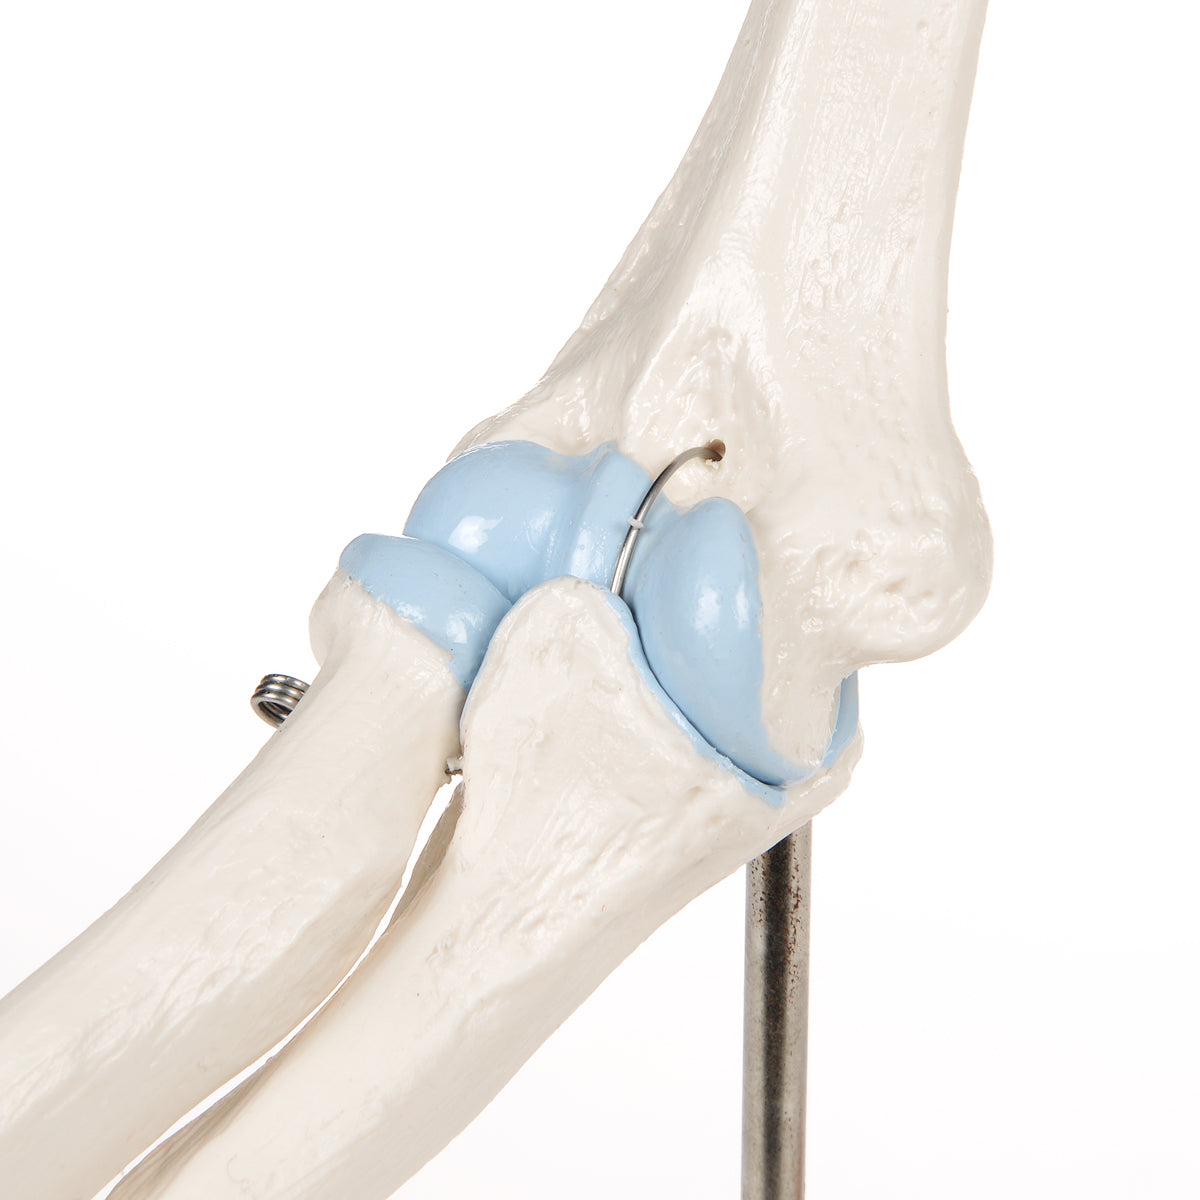 Flexible and reduced elbow model plus a cross section of the elbow joint